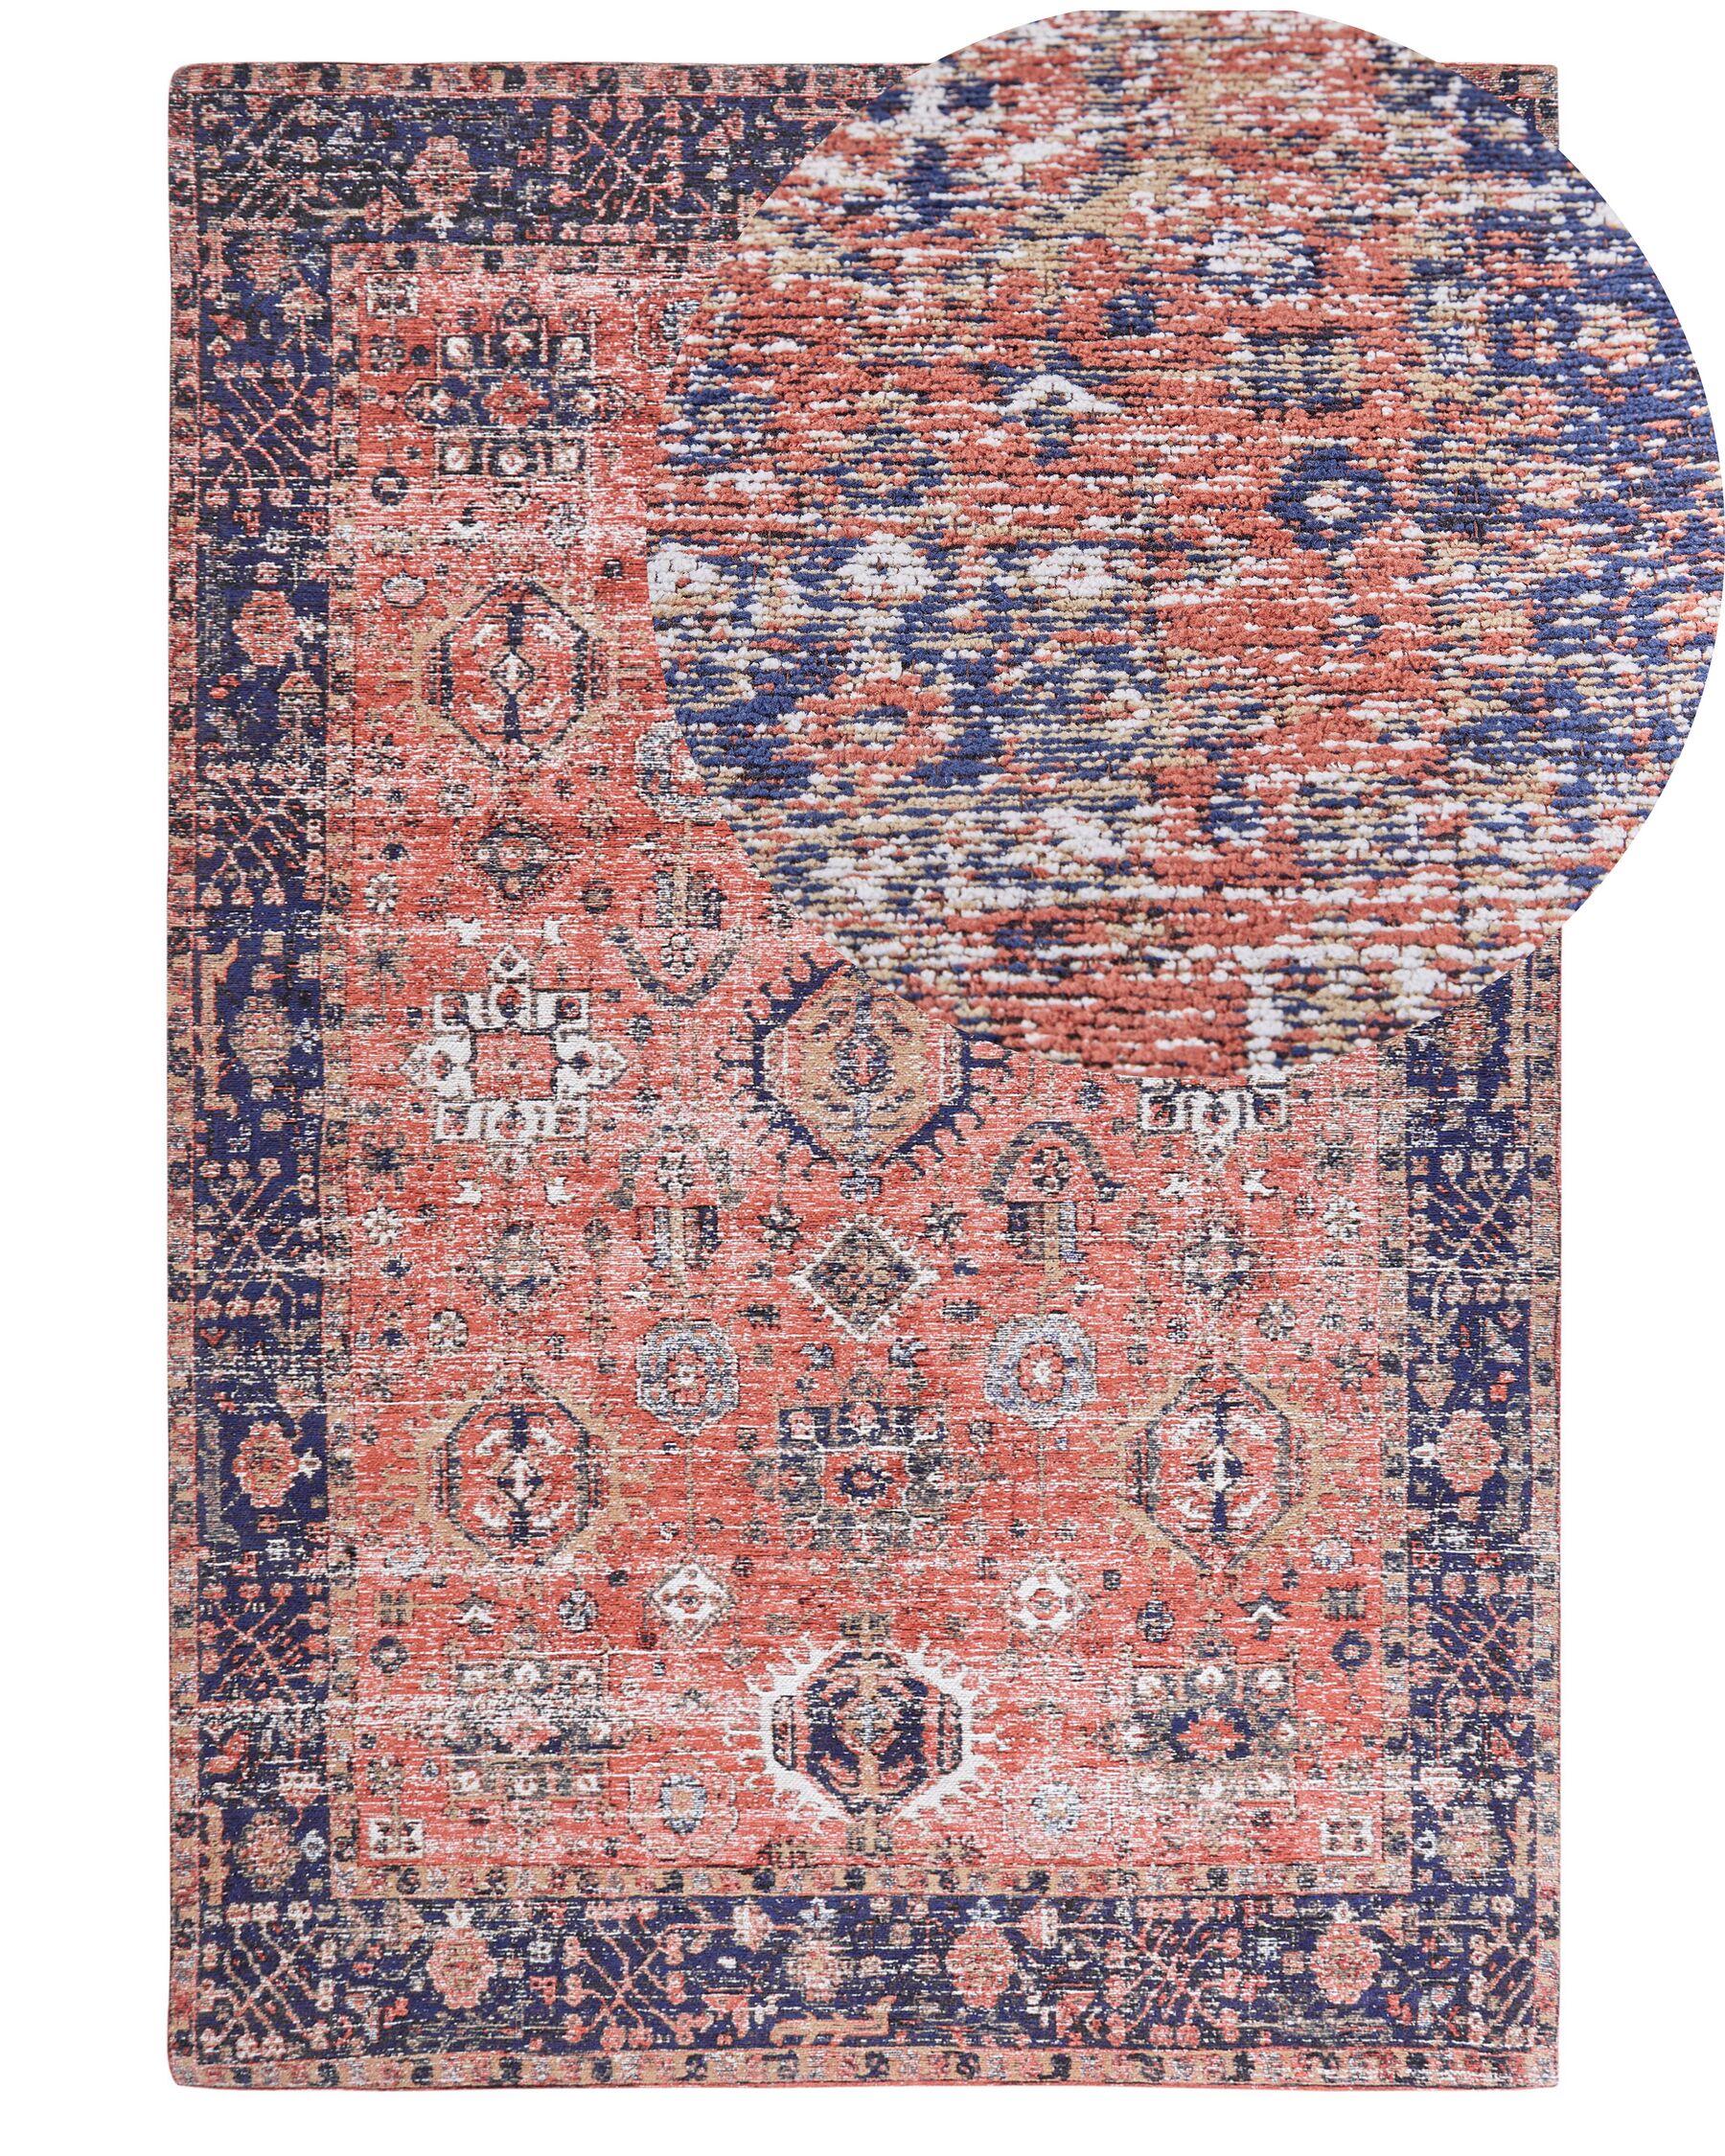 Cotton Area Rug 140 x 200 cm Red and Blue KURIN_862991